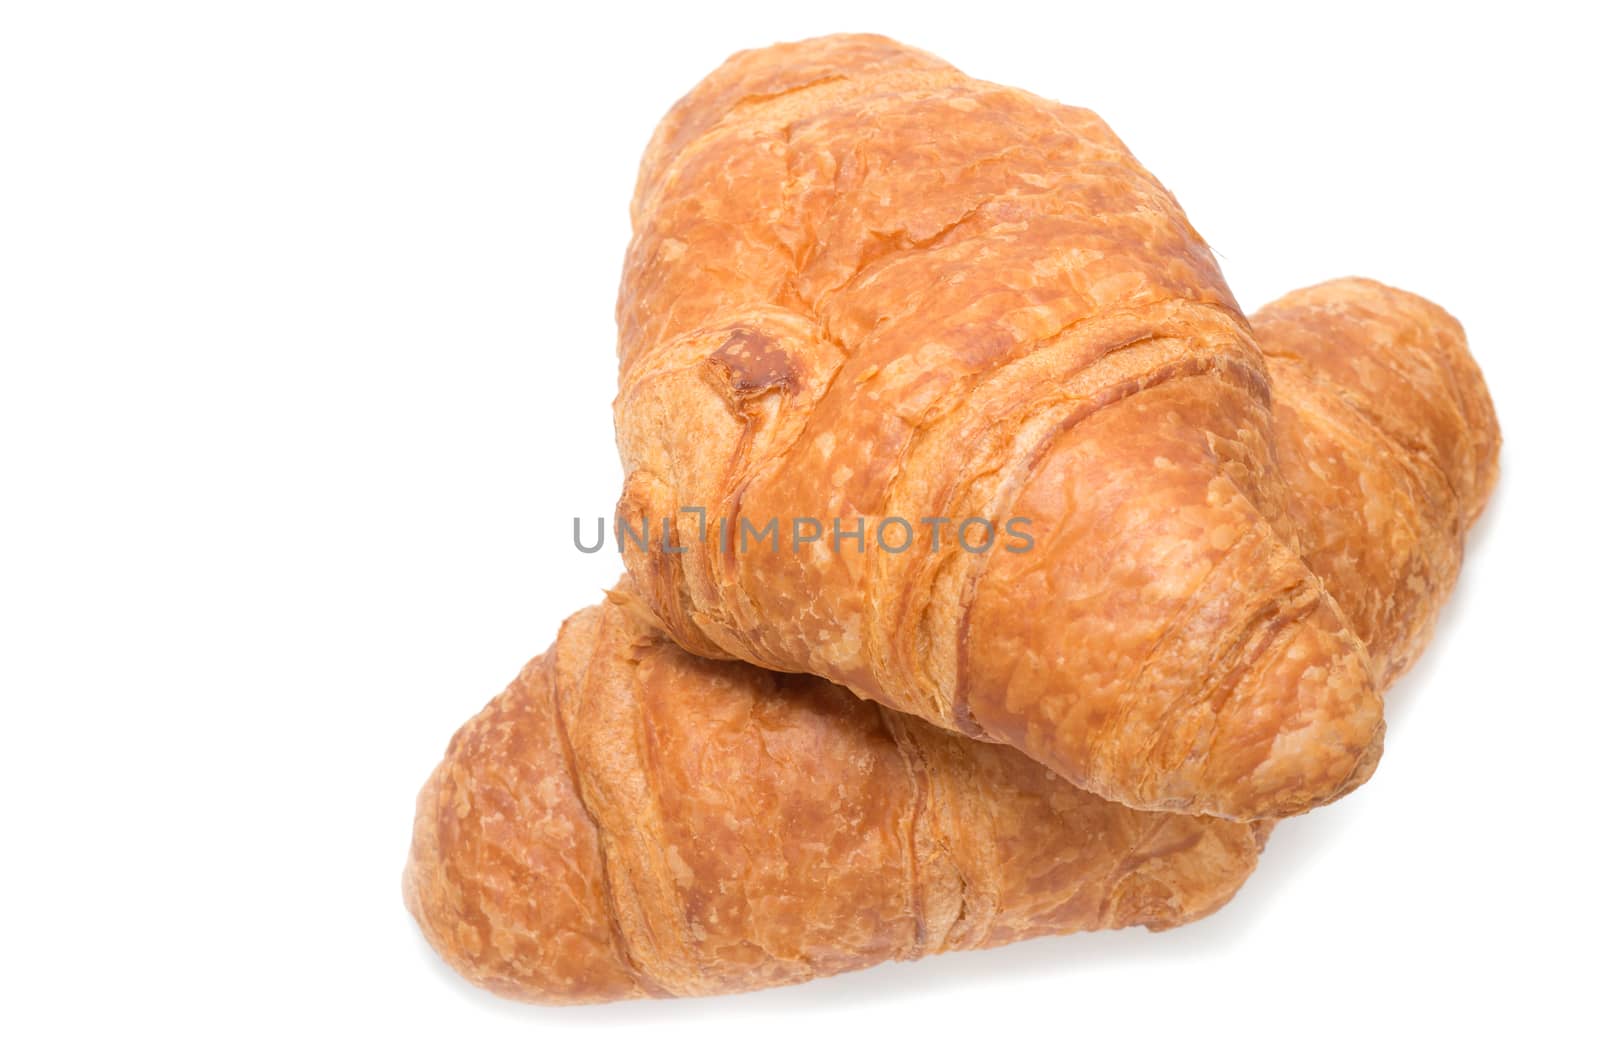 Two French croissants on white background